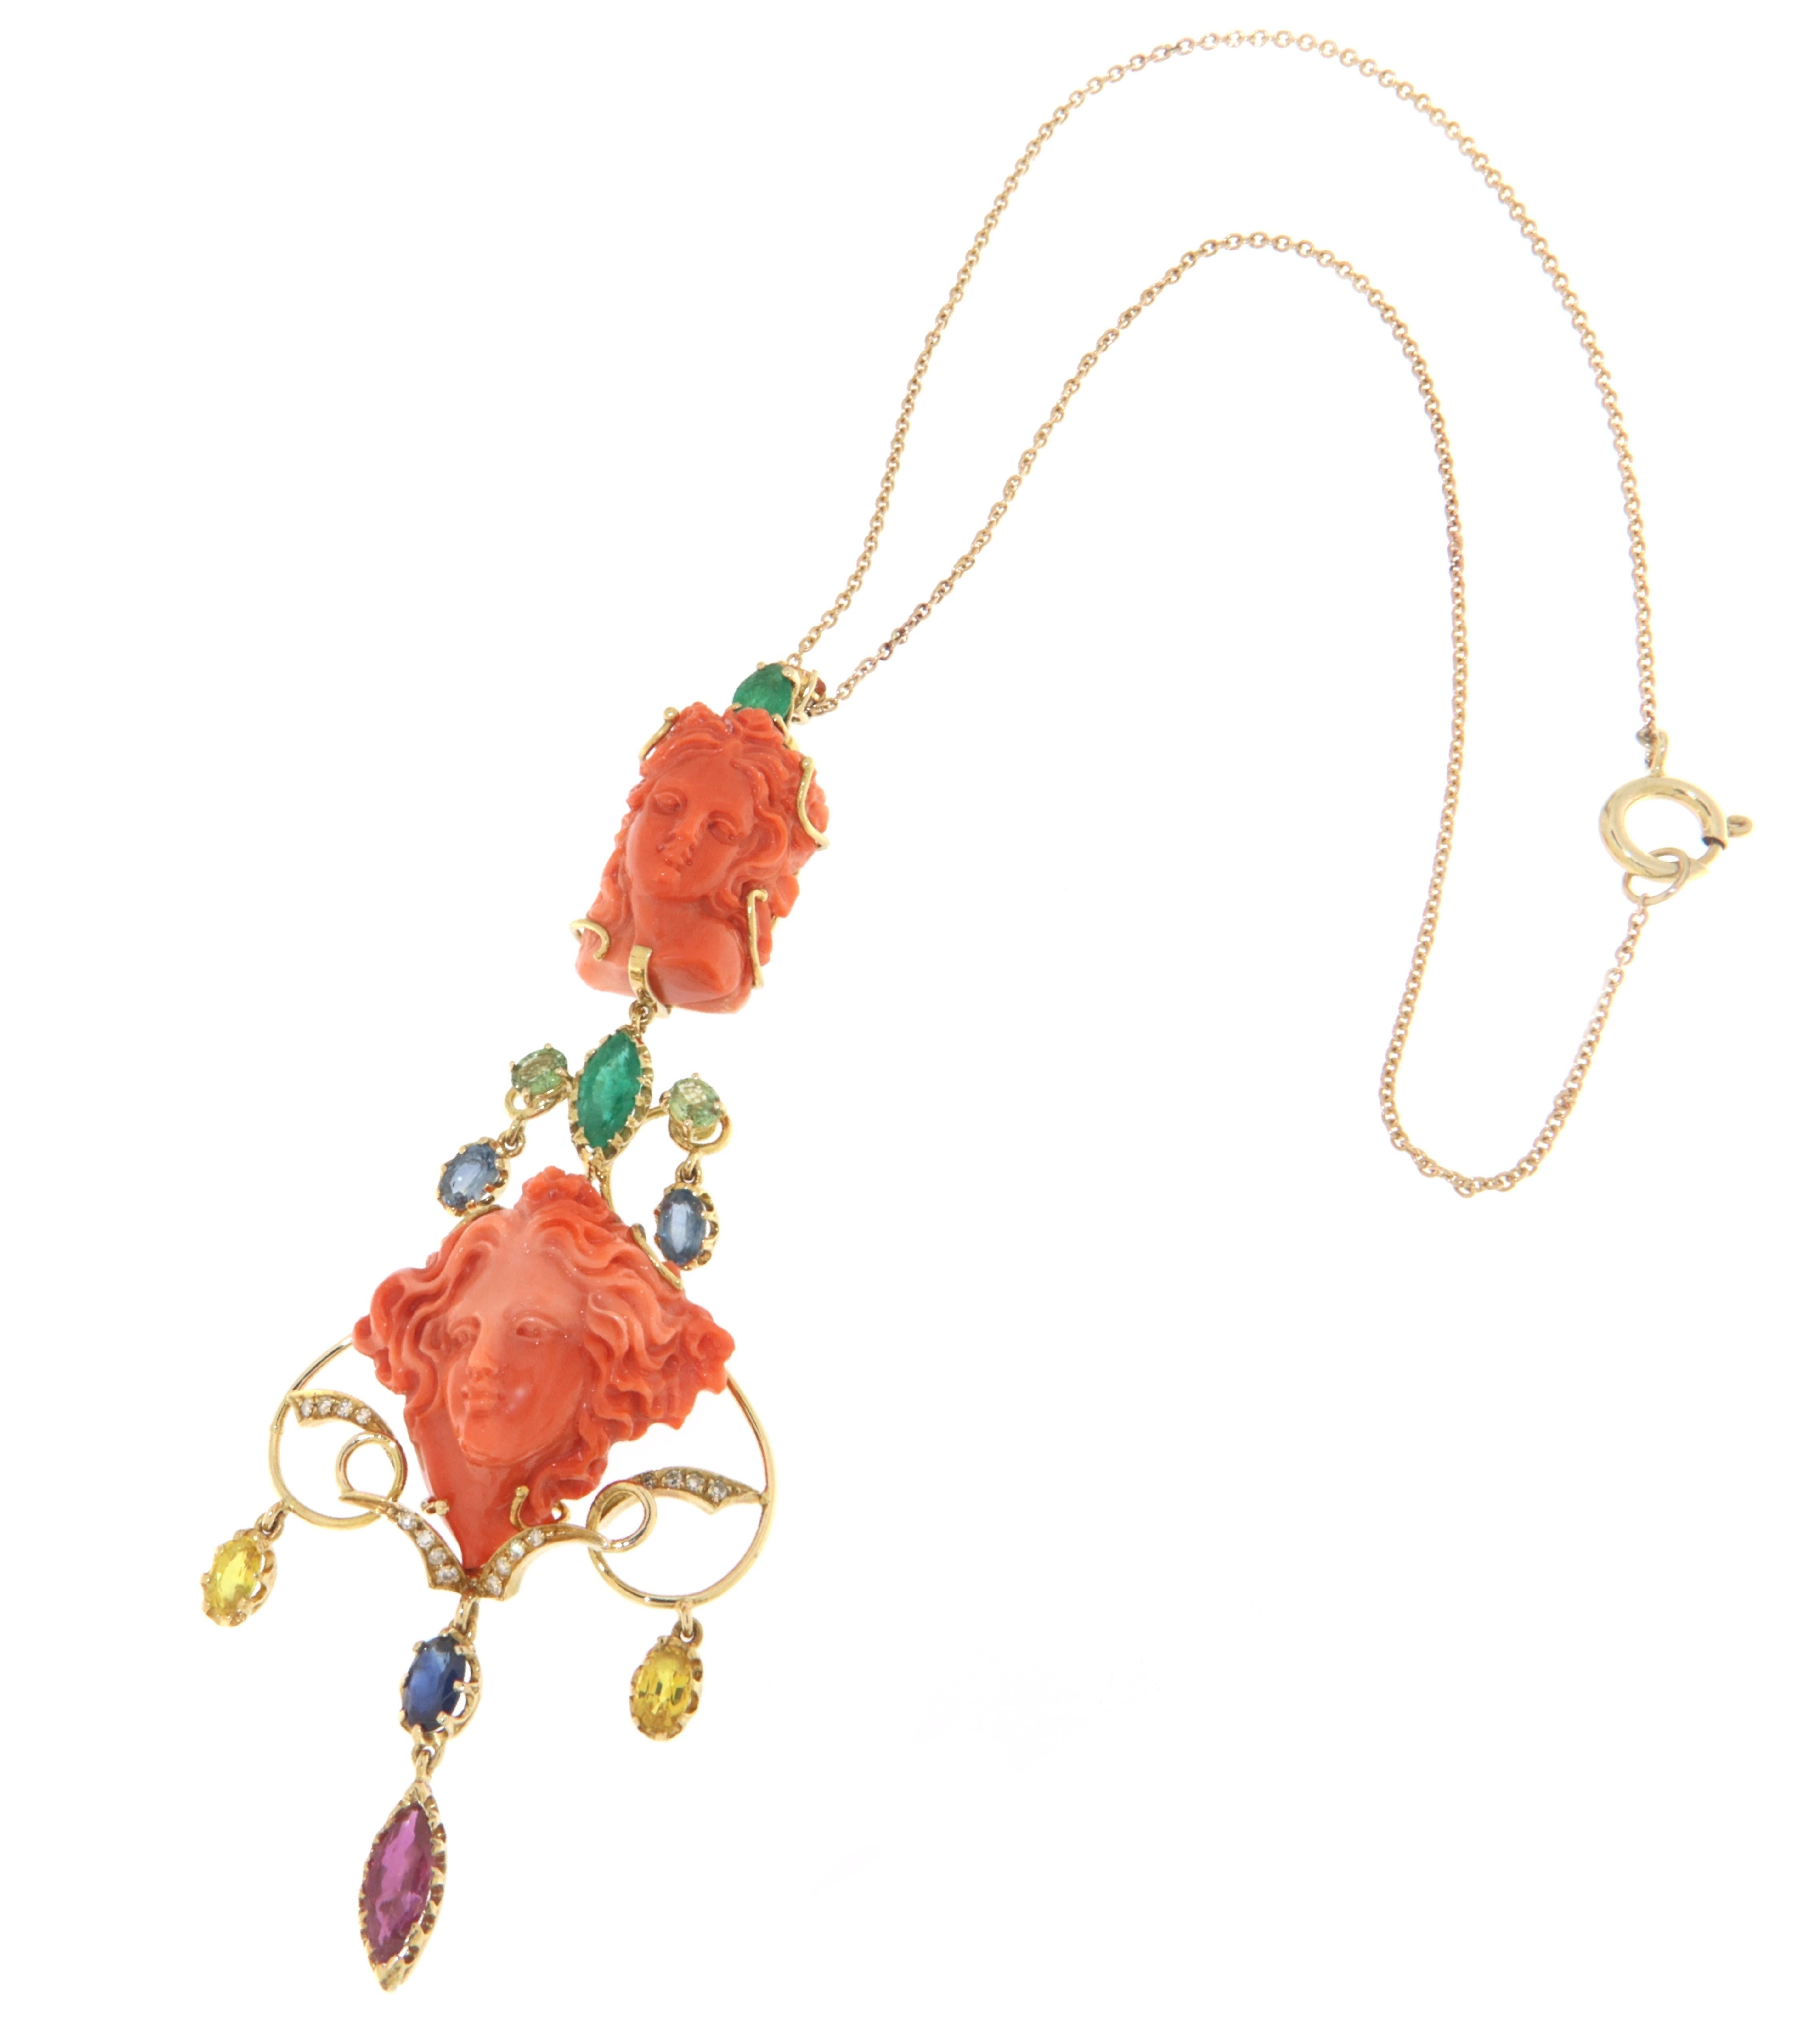 Spectacular pendant necklace made of 14K yellow gold, with an engraved coral face of a woman supporting a structure made up of gold ornaments and colored stones that surround another woman's face in engraved coral.

The textures of the colors and